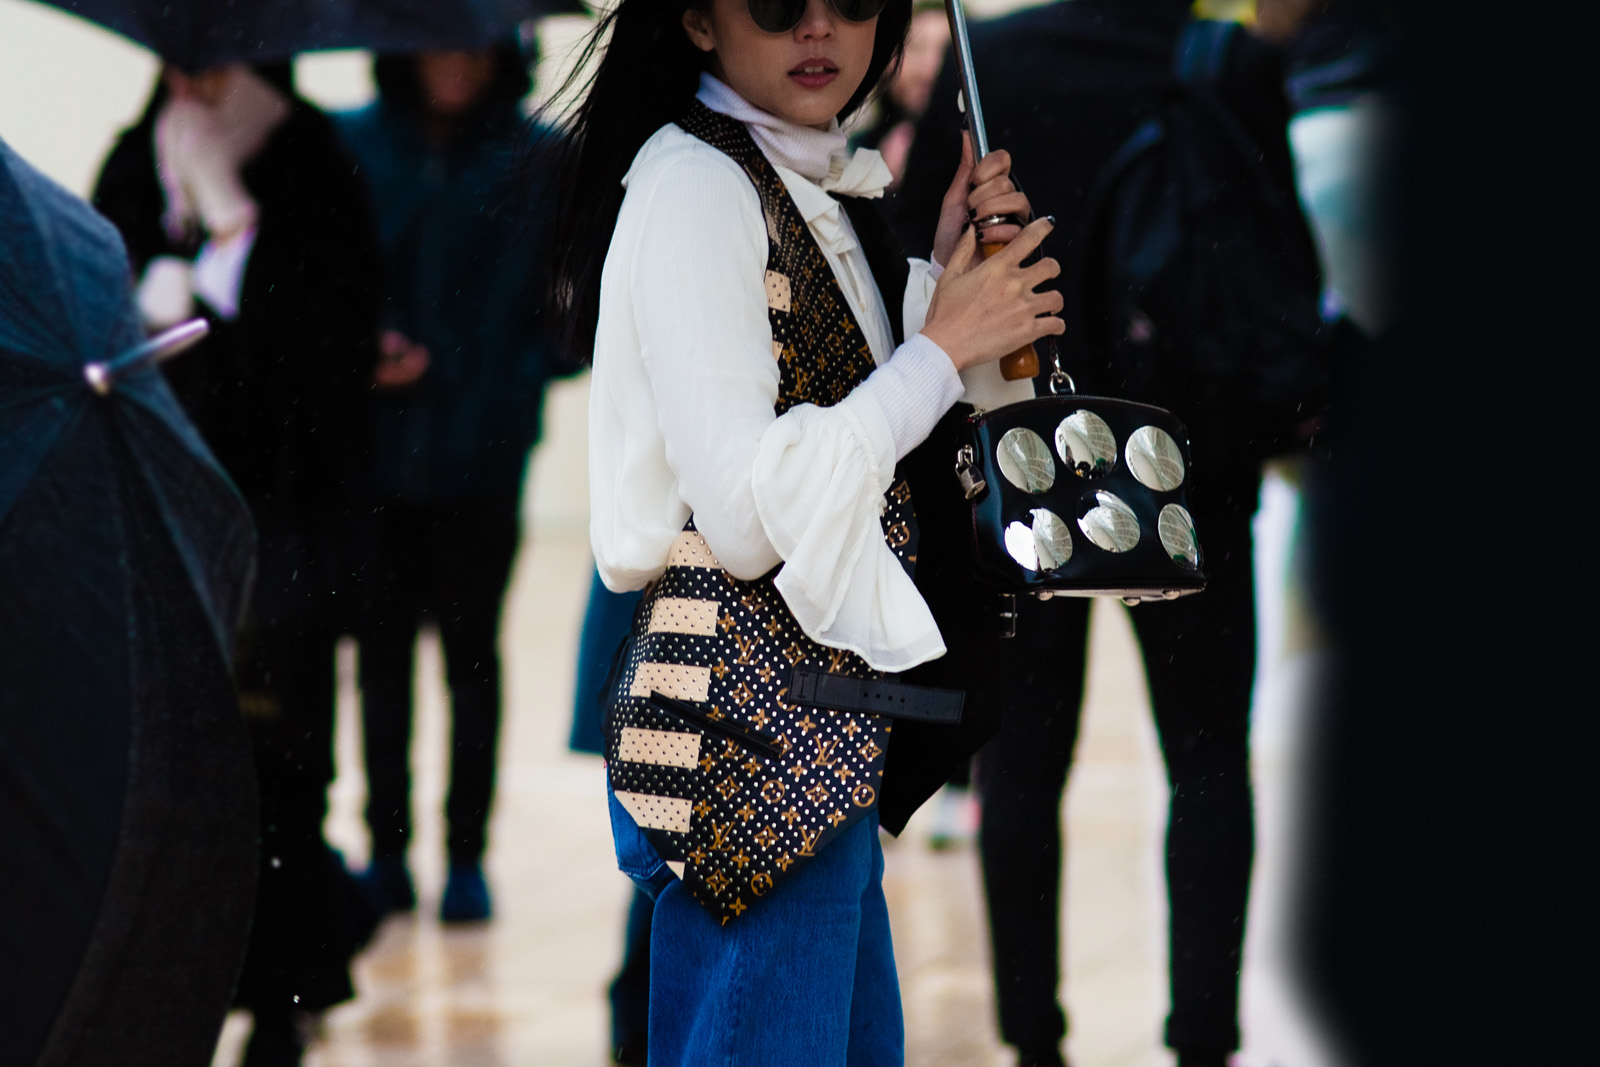 Yoyo Cao wearing Louis Vuitton and Off-White jeans before the Louis Vuitton Fall/Winter 2016-2017 fashion show in Paris, France